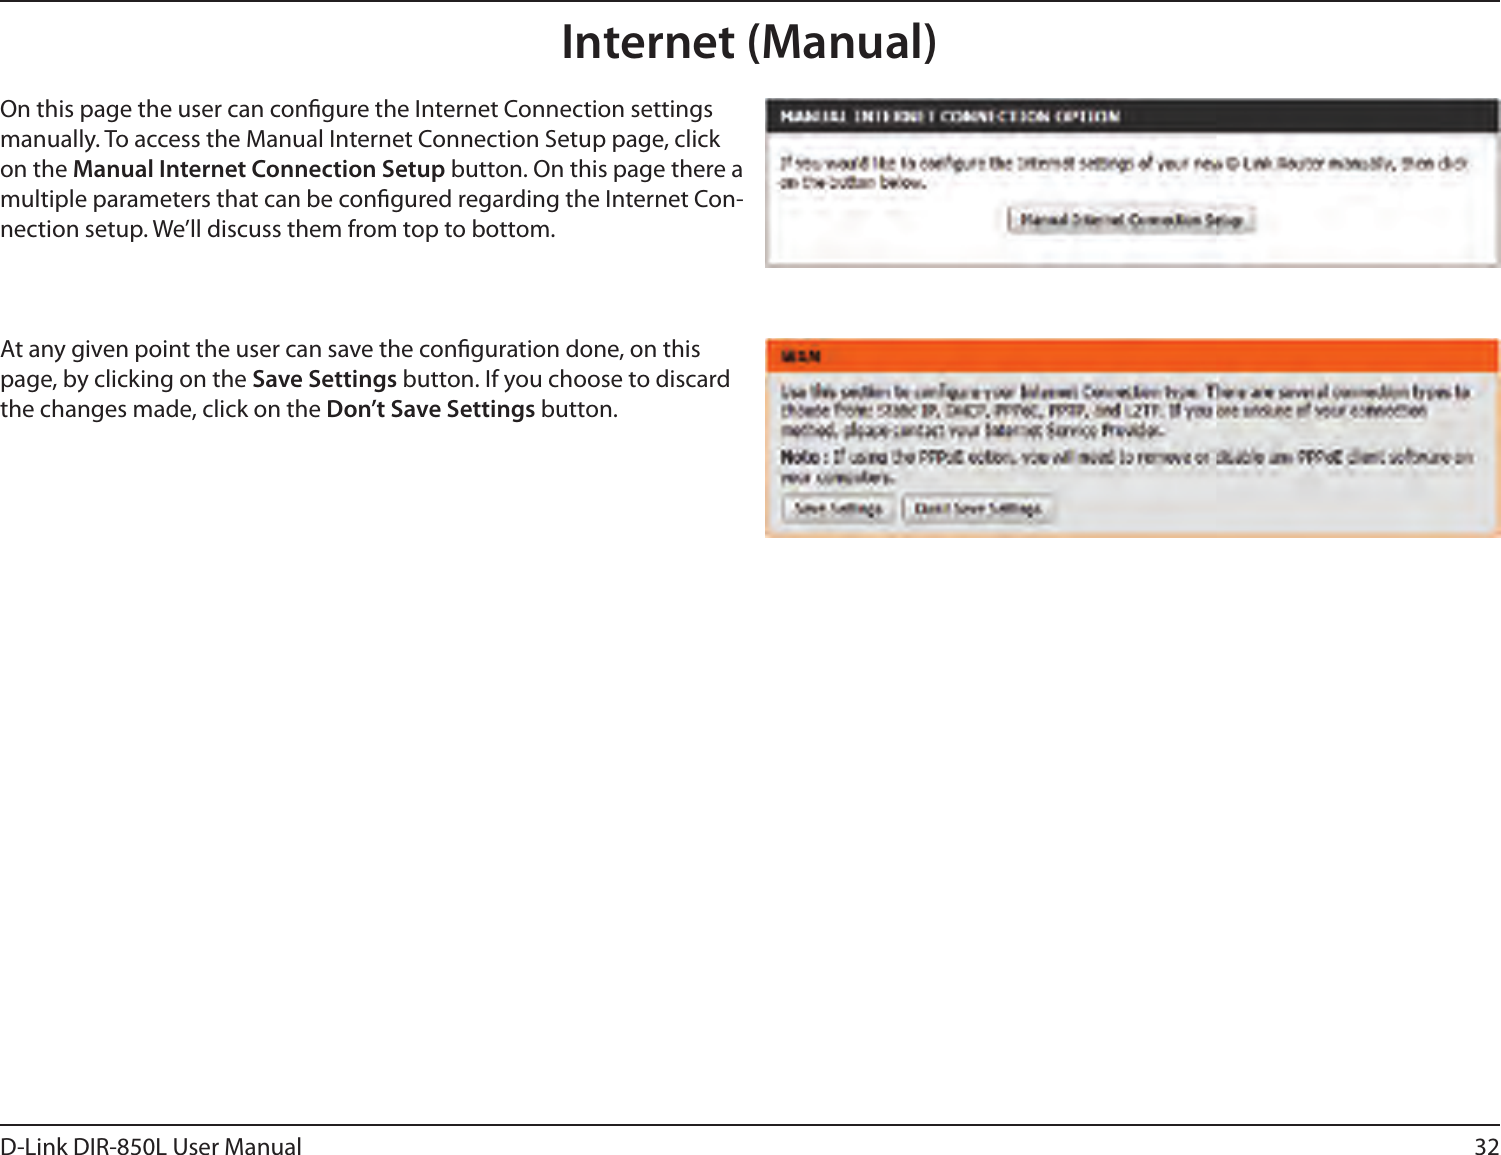 32D-Link DIR-850L User ManualInternet (Manual)On this page the user can congure the Internet Connection settings manually. To access the Manual Internet Connection Setup page, click on the Manual Internet Connection Setup button. On this page there a multiple parameters that can be congured regarding the Internet Con-nection setup. We’ll discuss them from top to bottom.At any given point the user can save the conguration done, on this page, by clicking on the Save Settings button. If you choose to discard the changes made, click on the Don’t Save Settings button.